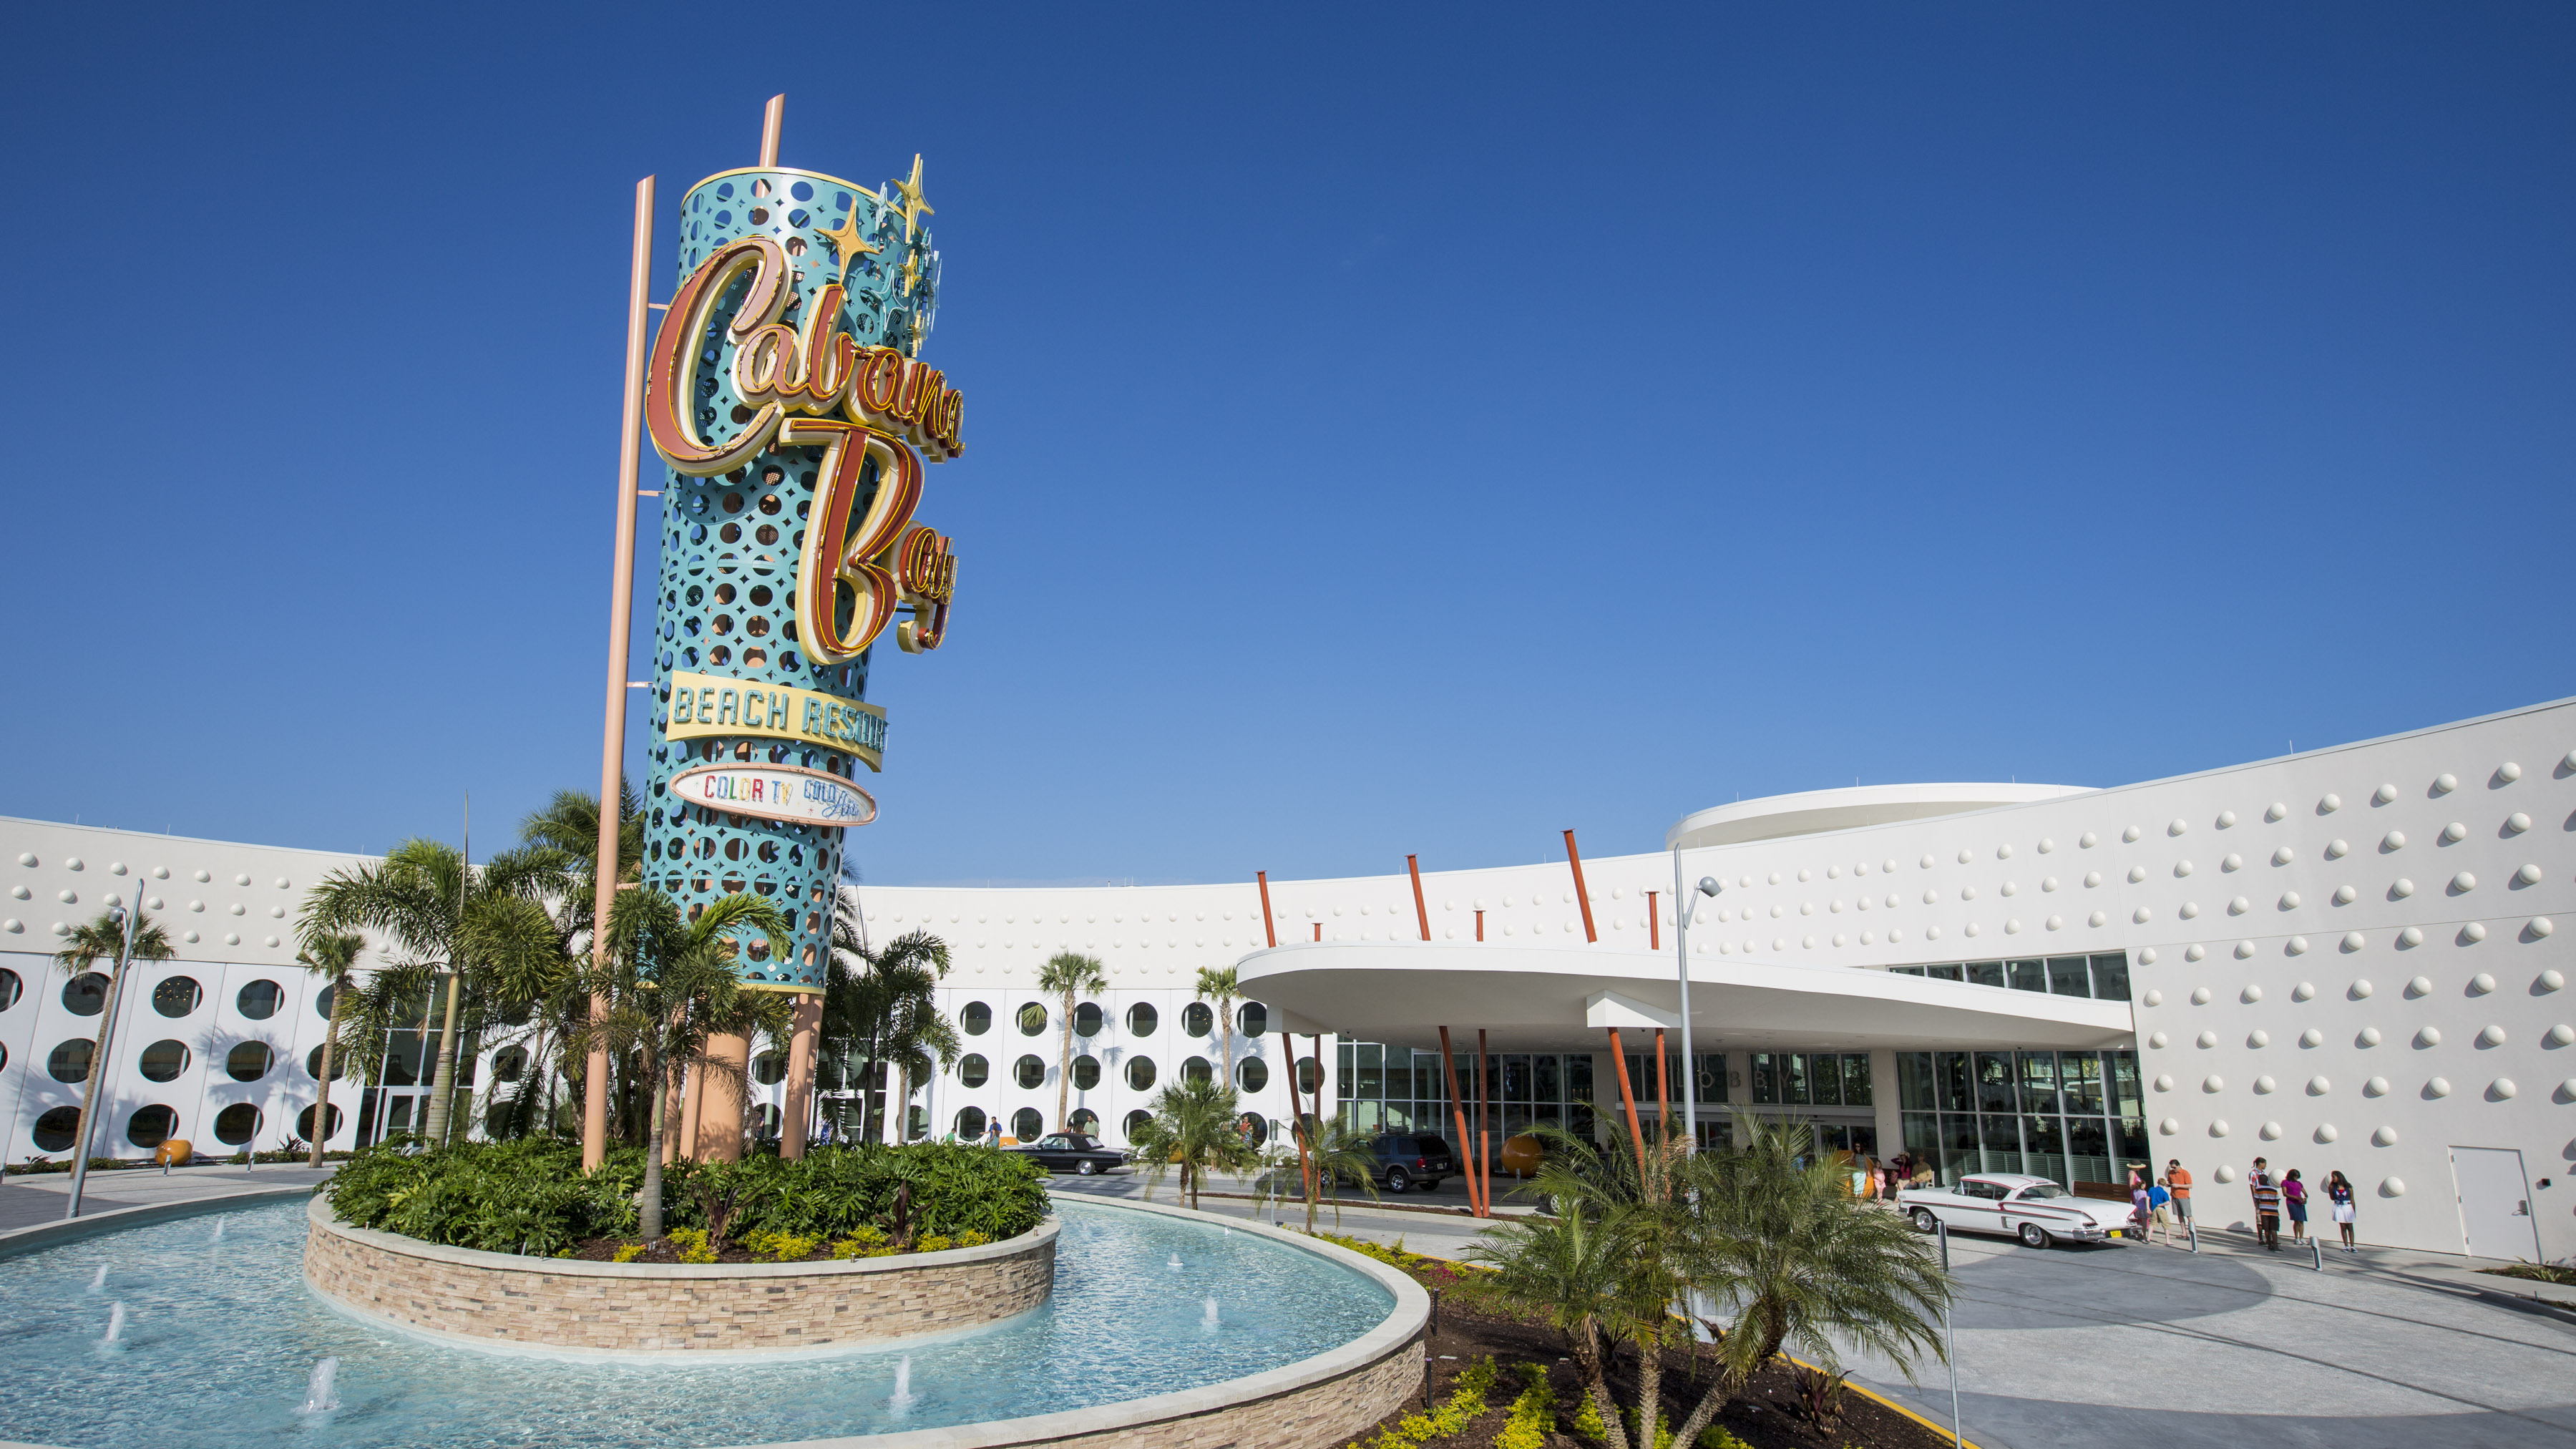 Universal Orlando?s fourth on-site hotel, Universal?s Cabana Bay Beach Resort is now open! The retro-inspired hotel features incredible amenities for endless family fun including a 10,000 sq. ft. zero-entry pool with iconic dive tower waterslide, 10-lane bowling alley, the Jack LaLanne Physical Fitness Studio, family suites that sleep up to six and much more. This summer, guests will be able to enjoy even more family fun, including a second 8,000-square-foot zero entry pool, Universal Orlando?s first lazy river at an on-site hotel, The Hideaway Bar & Grill, and additional moderately-priced family suites and value-priced standard guest rooms. © Universal Orlando Resort. All Rights Reserved.